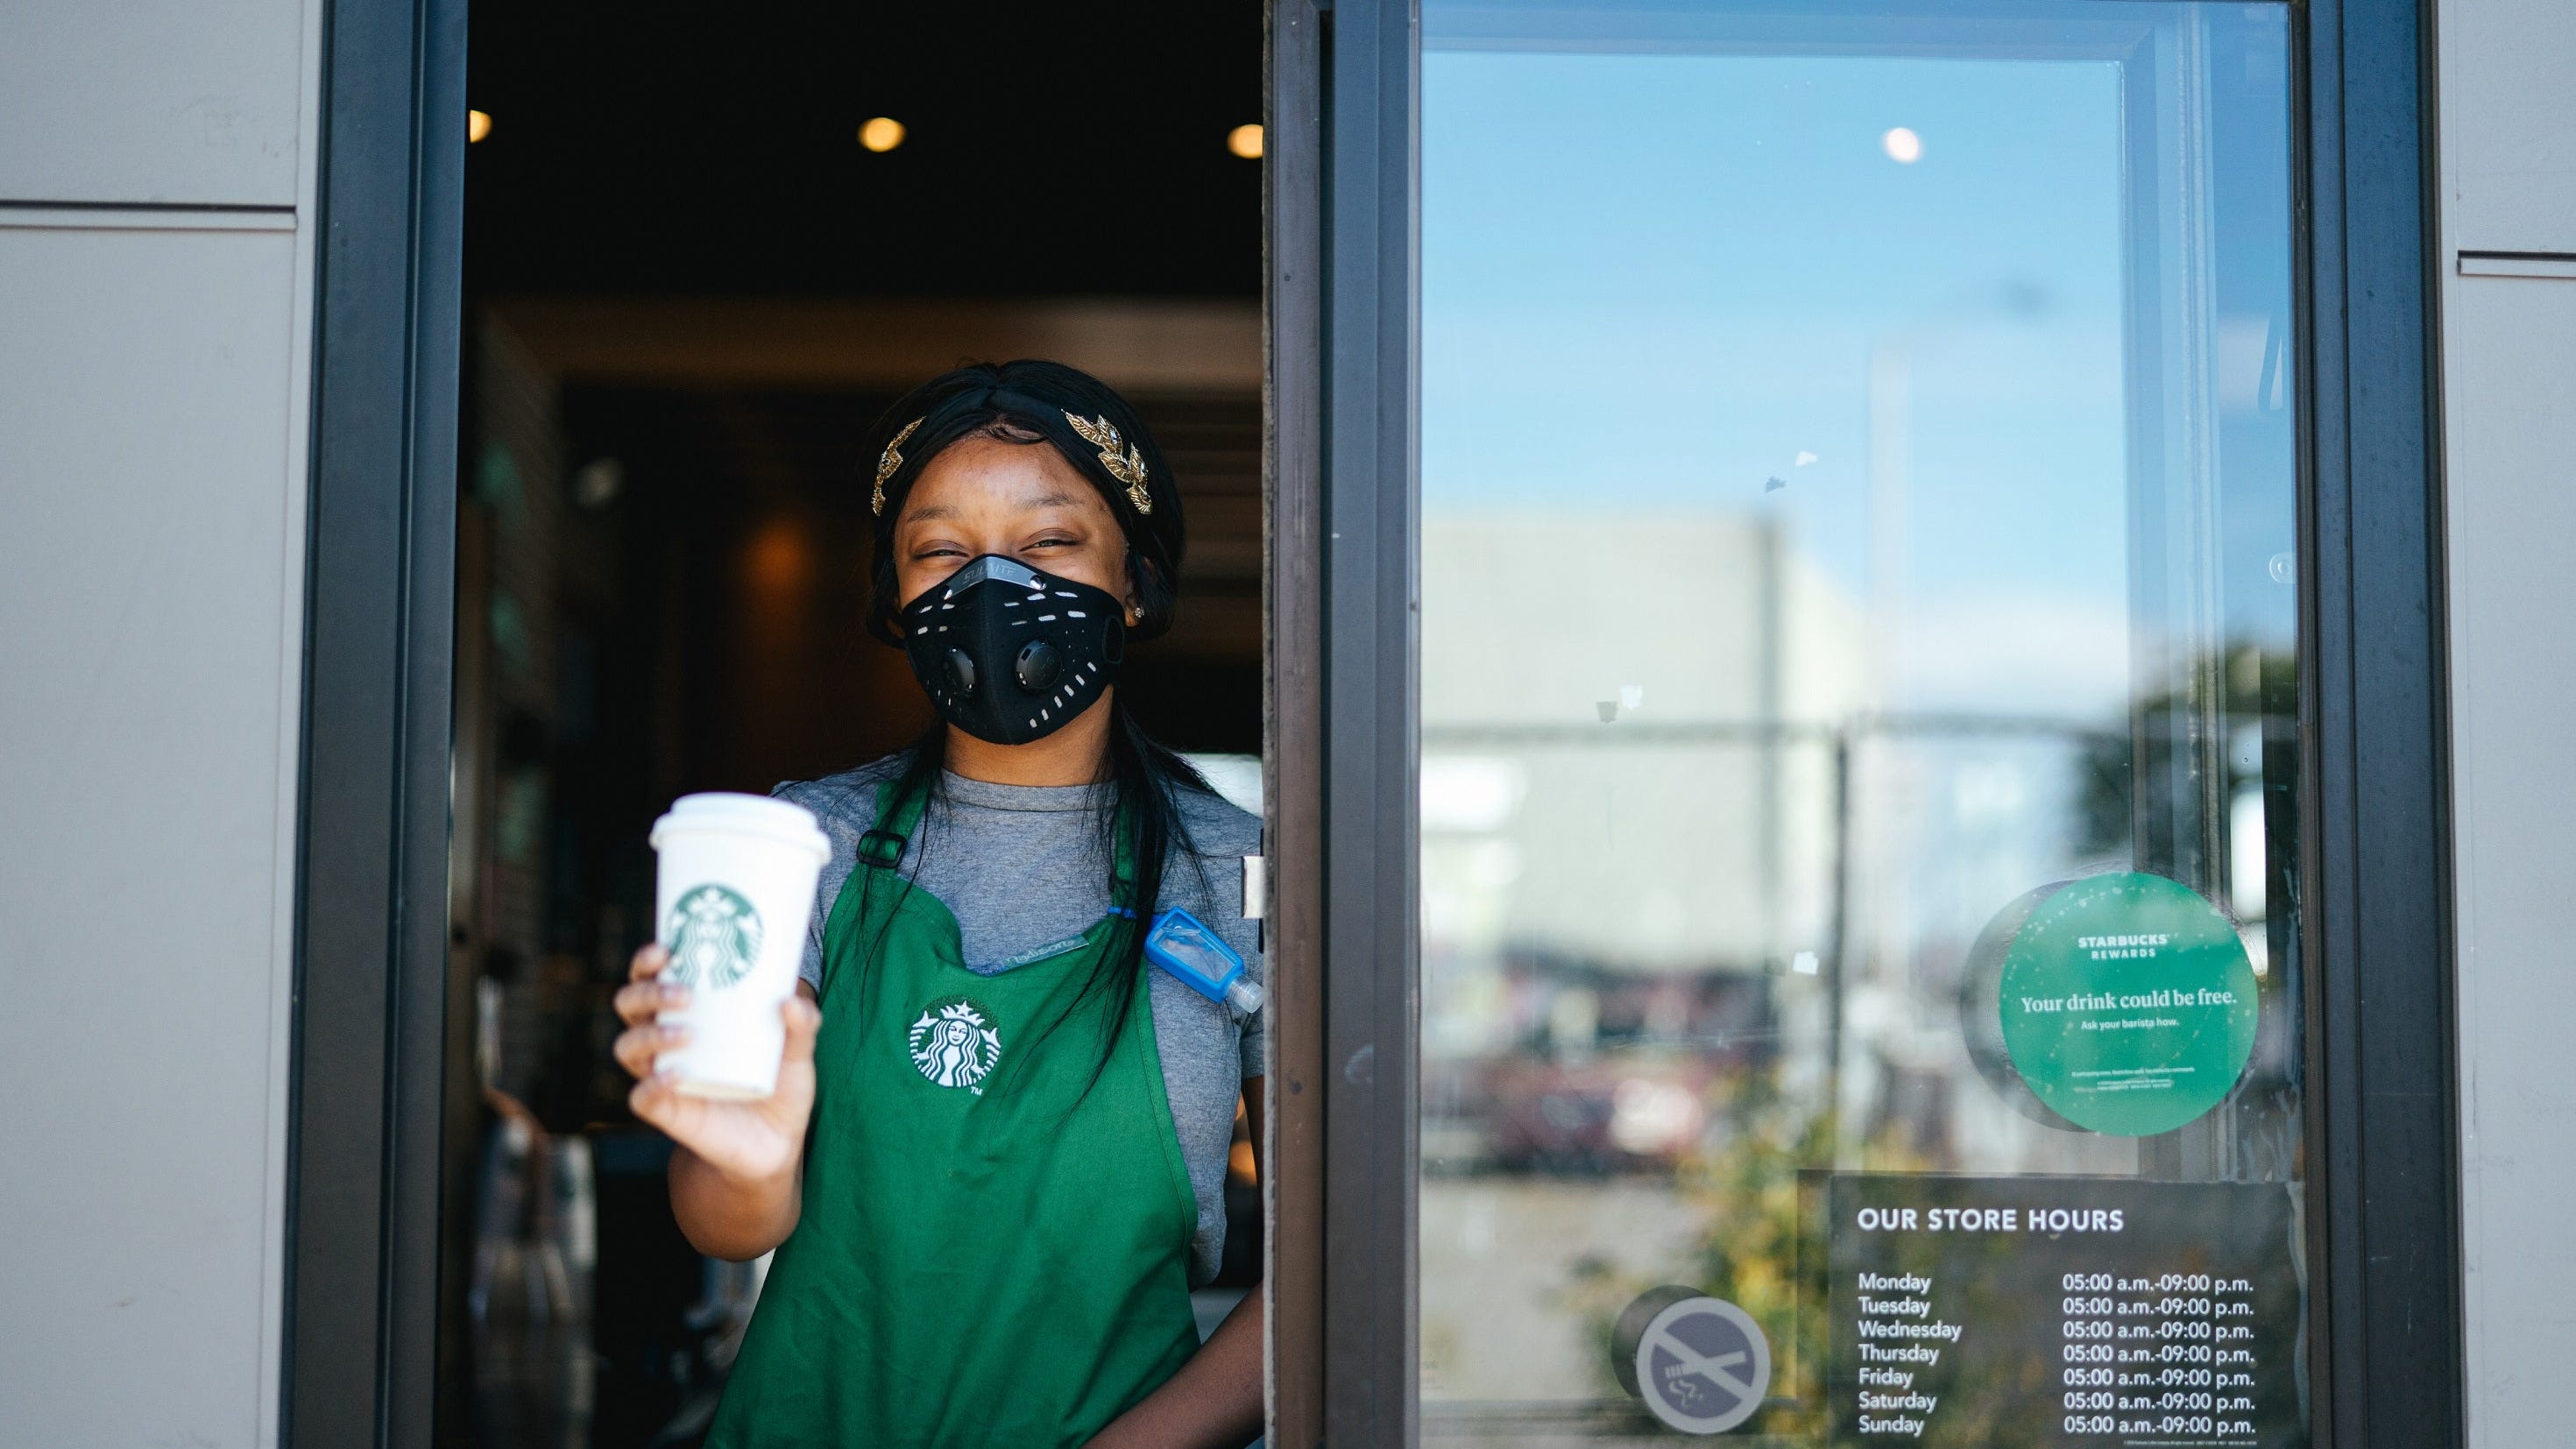 Starbucks faces reality, encouraging workers to take unpaid leave